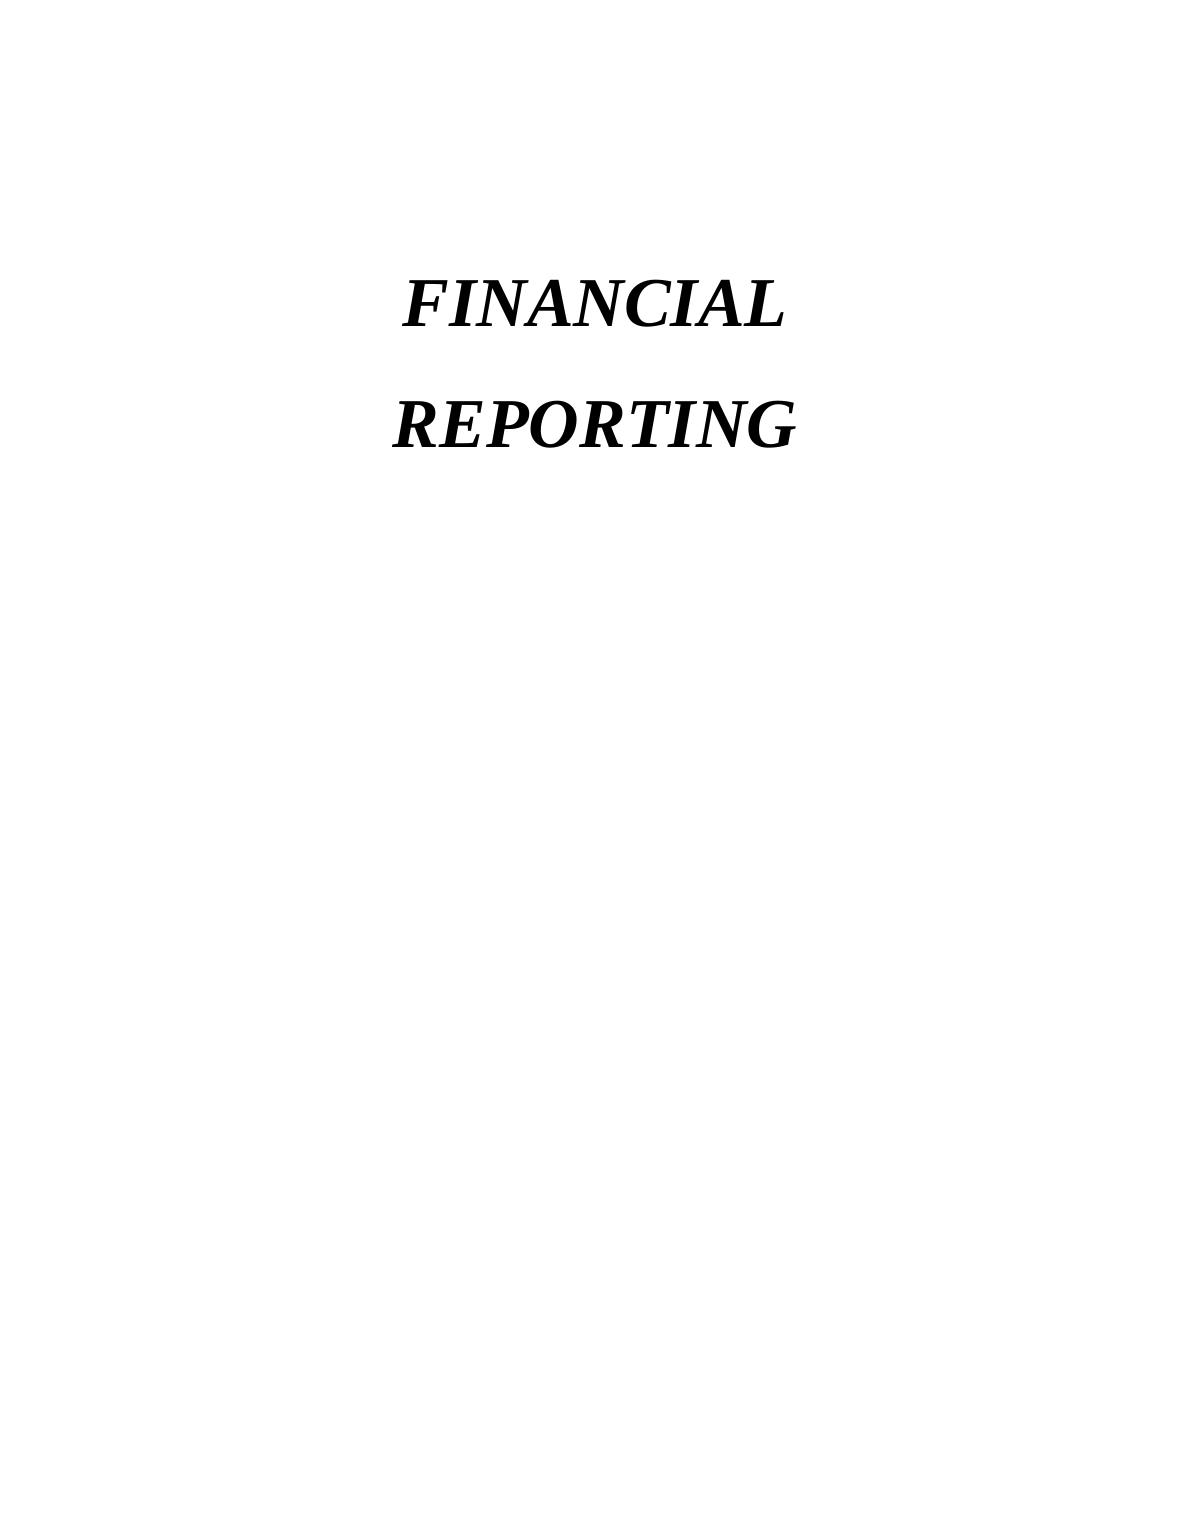 Context and Purpose of Financial Reporting_1